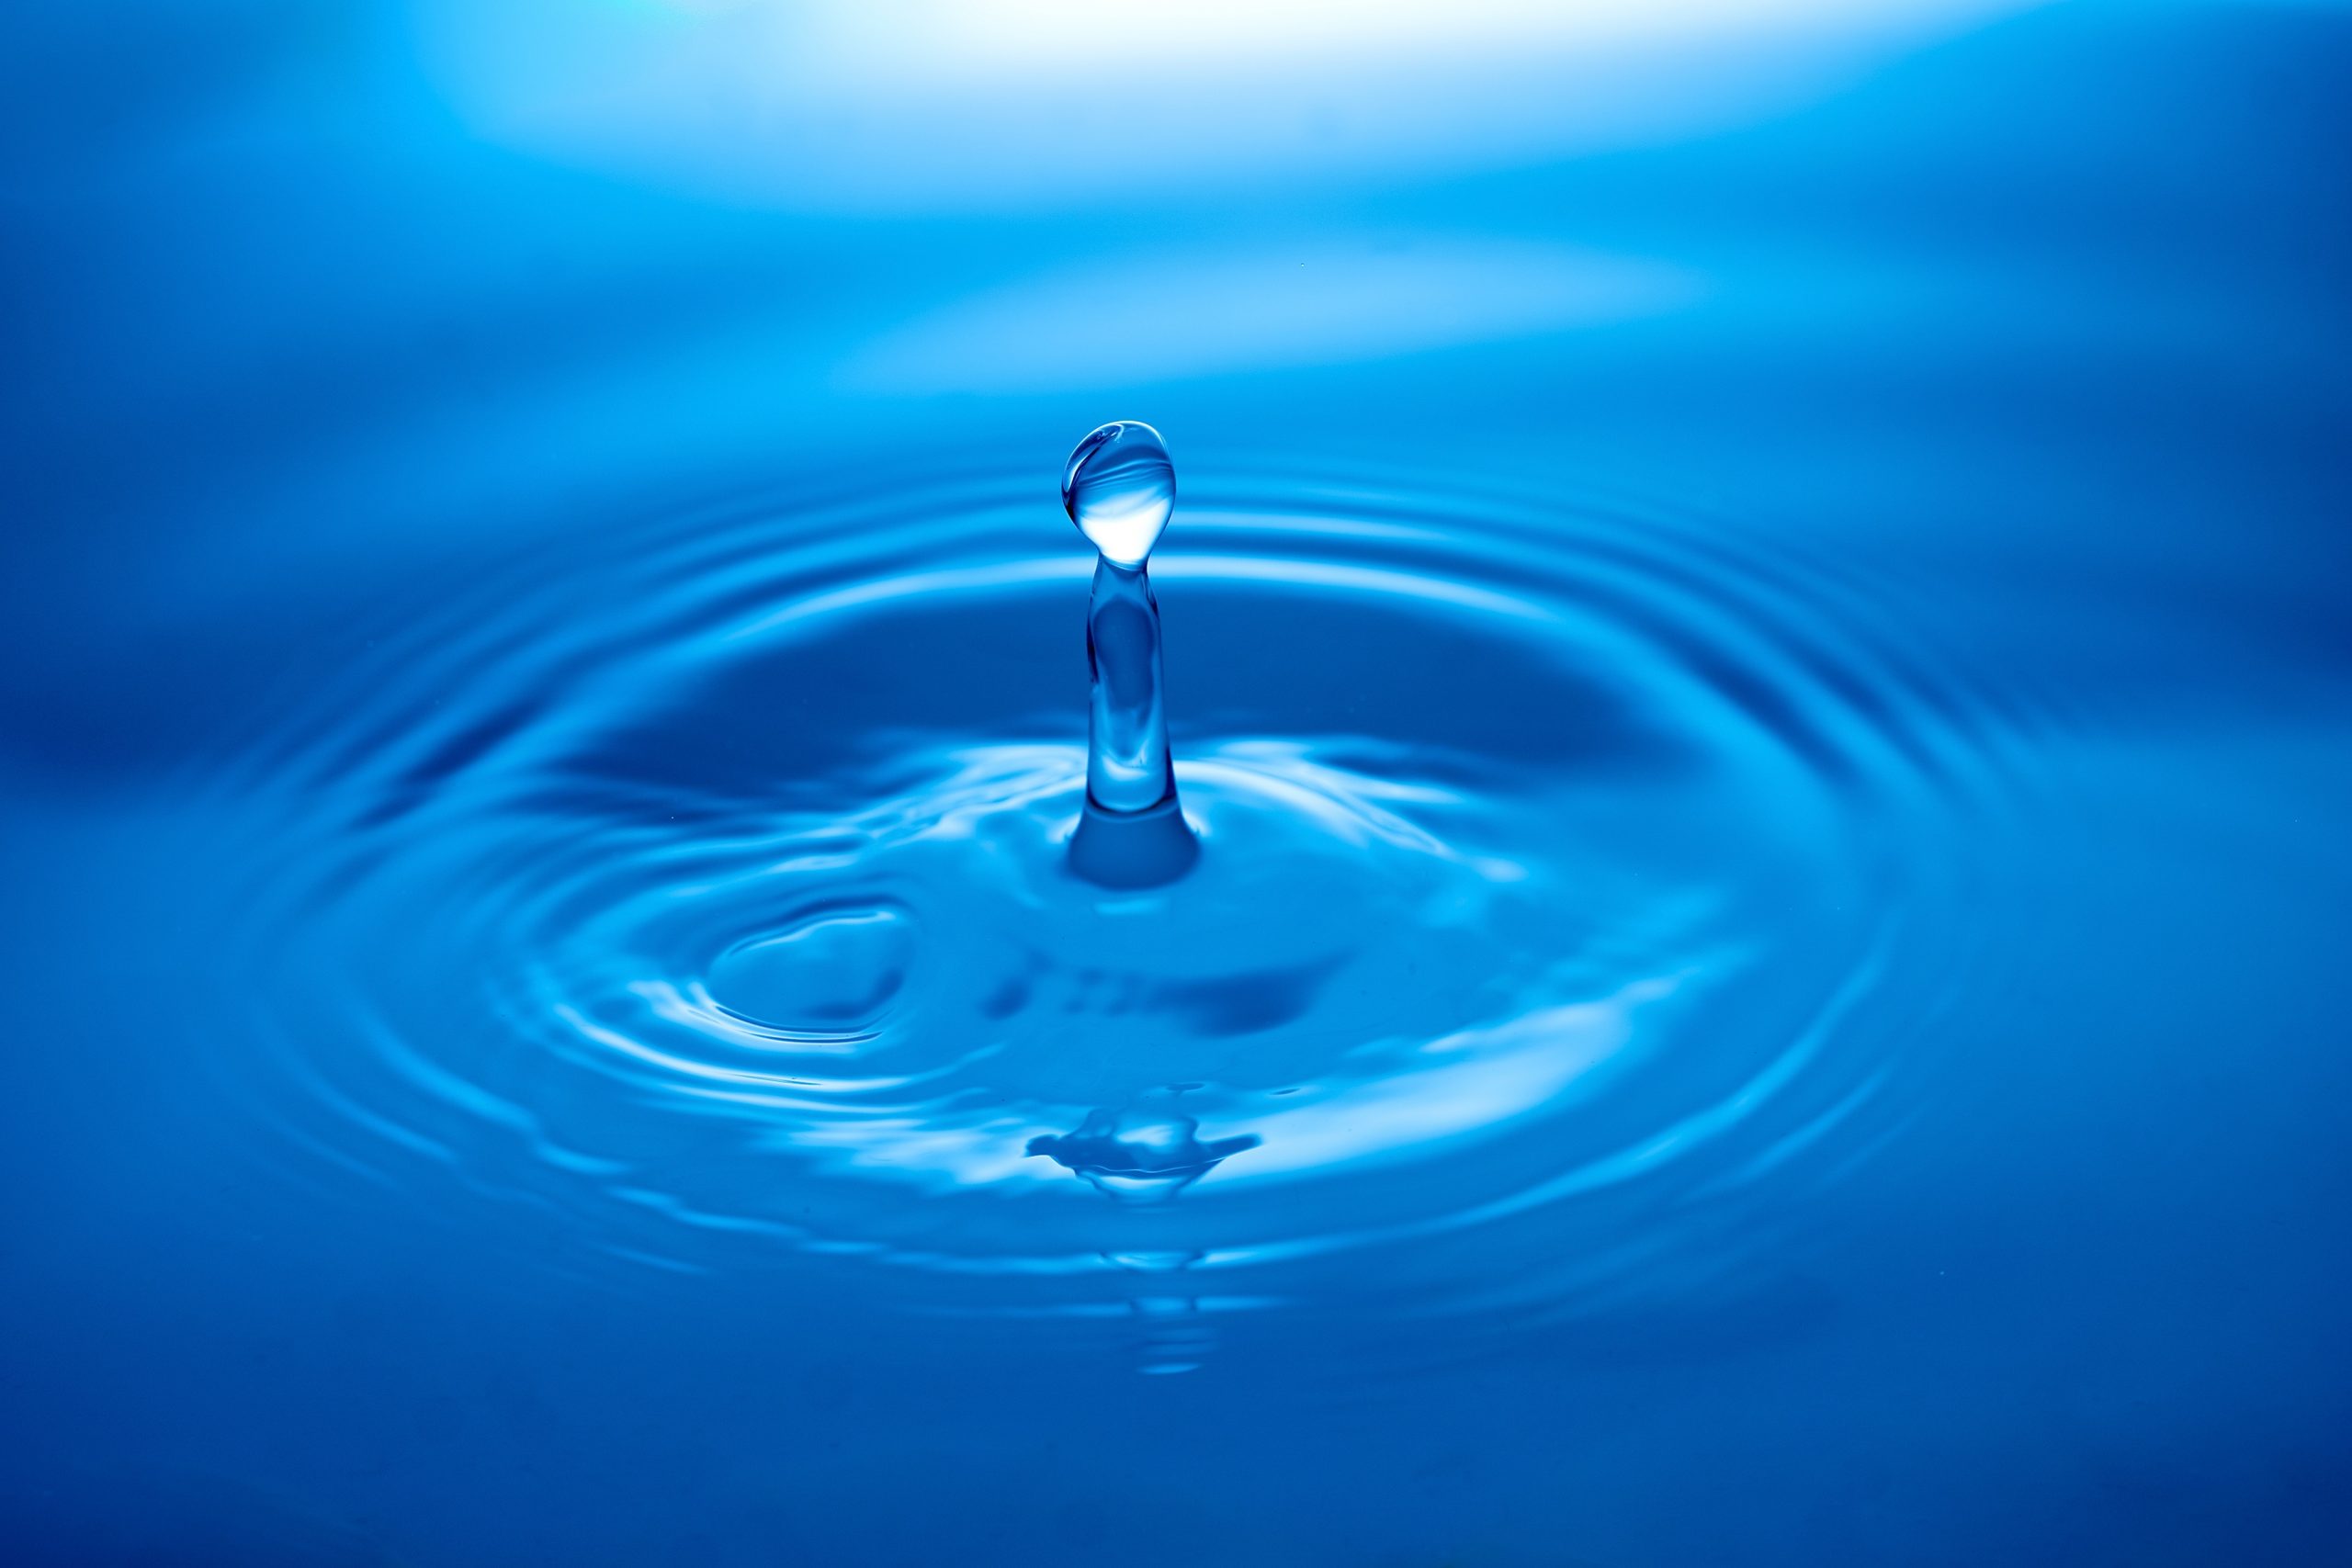 ISOF announces new nanotechnology product for water purification available on the market